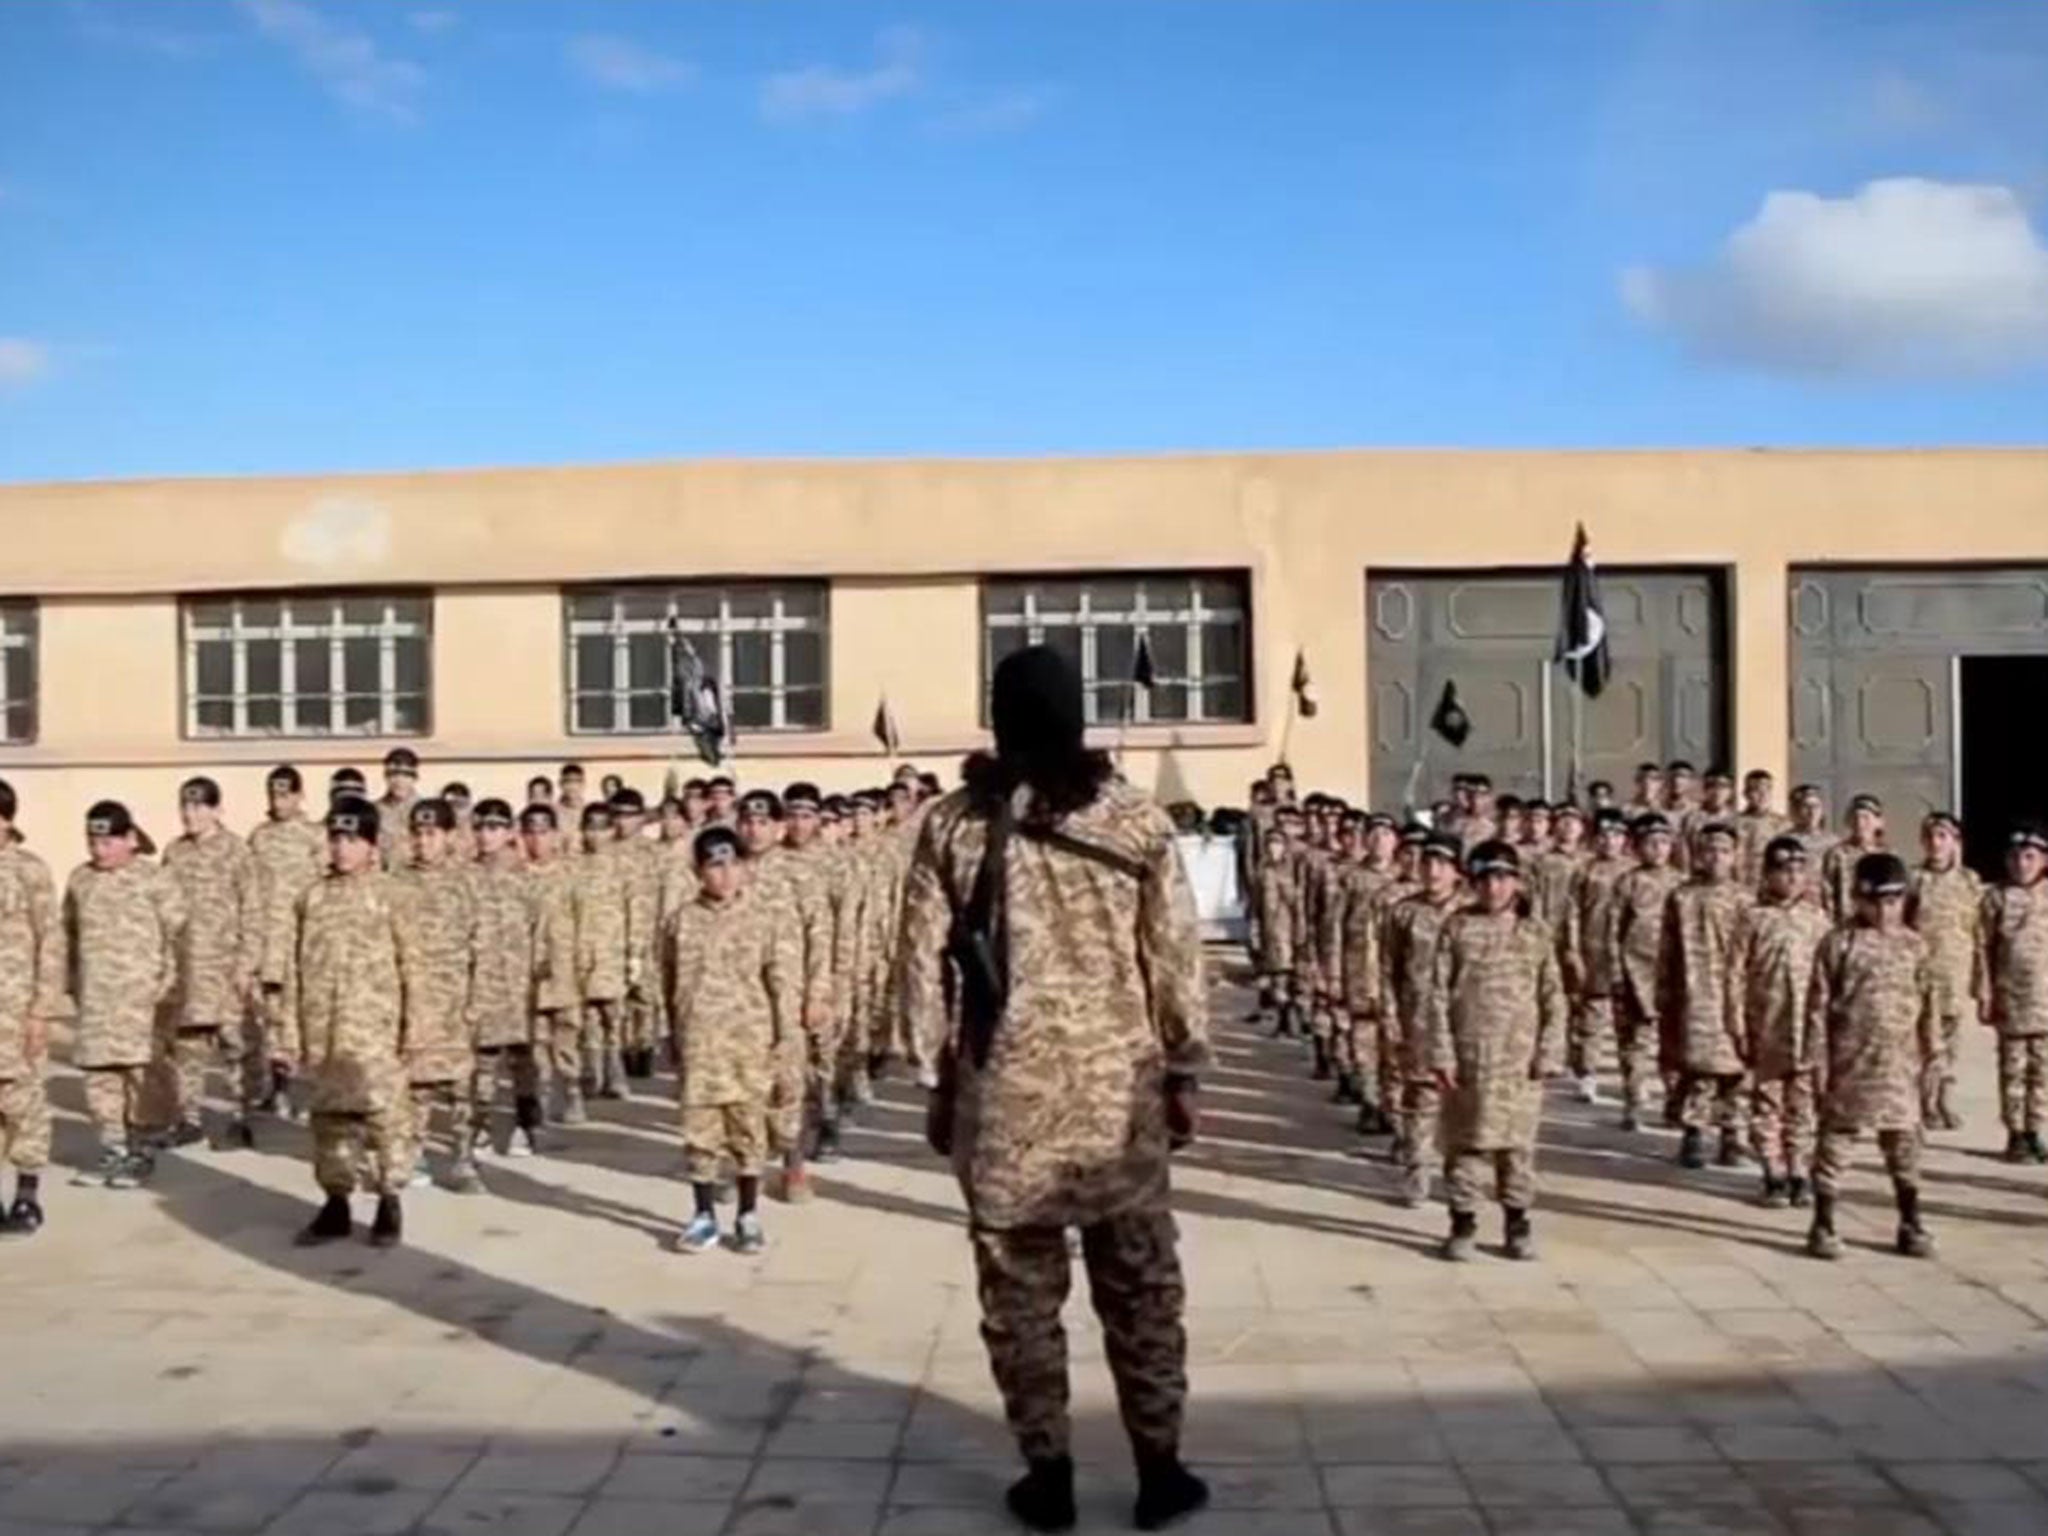 A still of an Isis video called "Al-Farouq Institute for Cubs" claiming to show a children's terror training camp